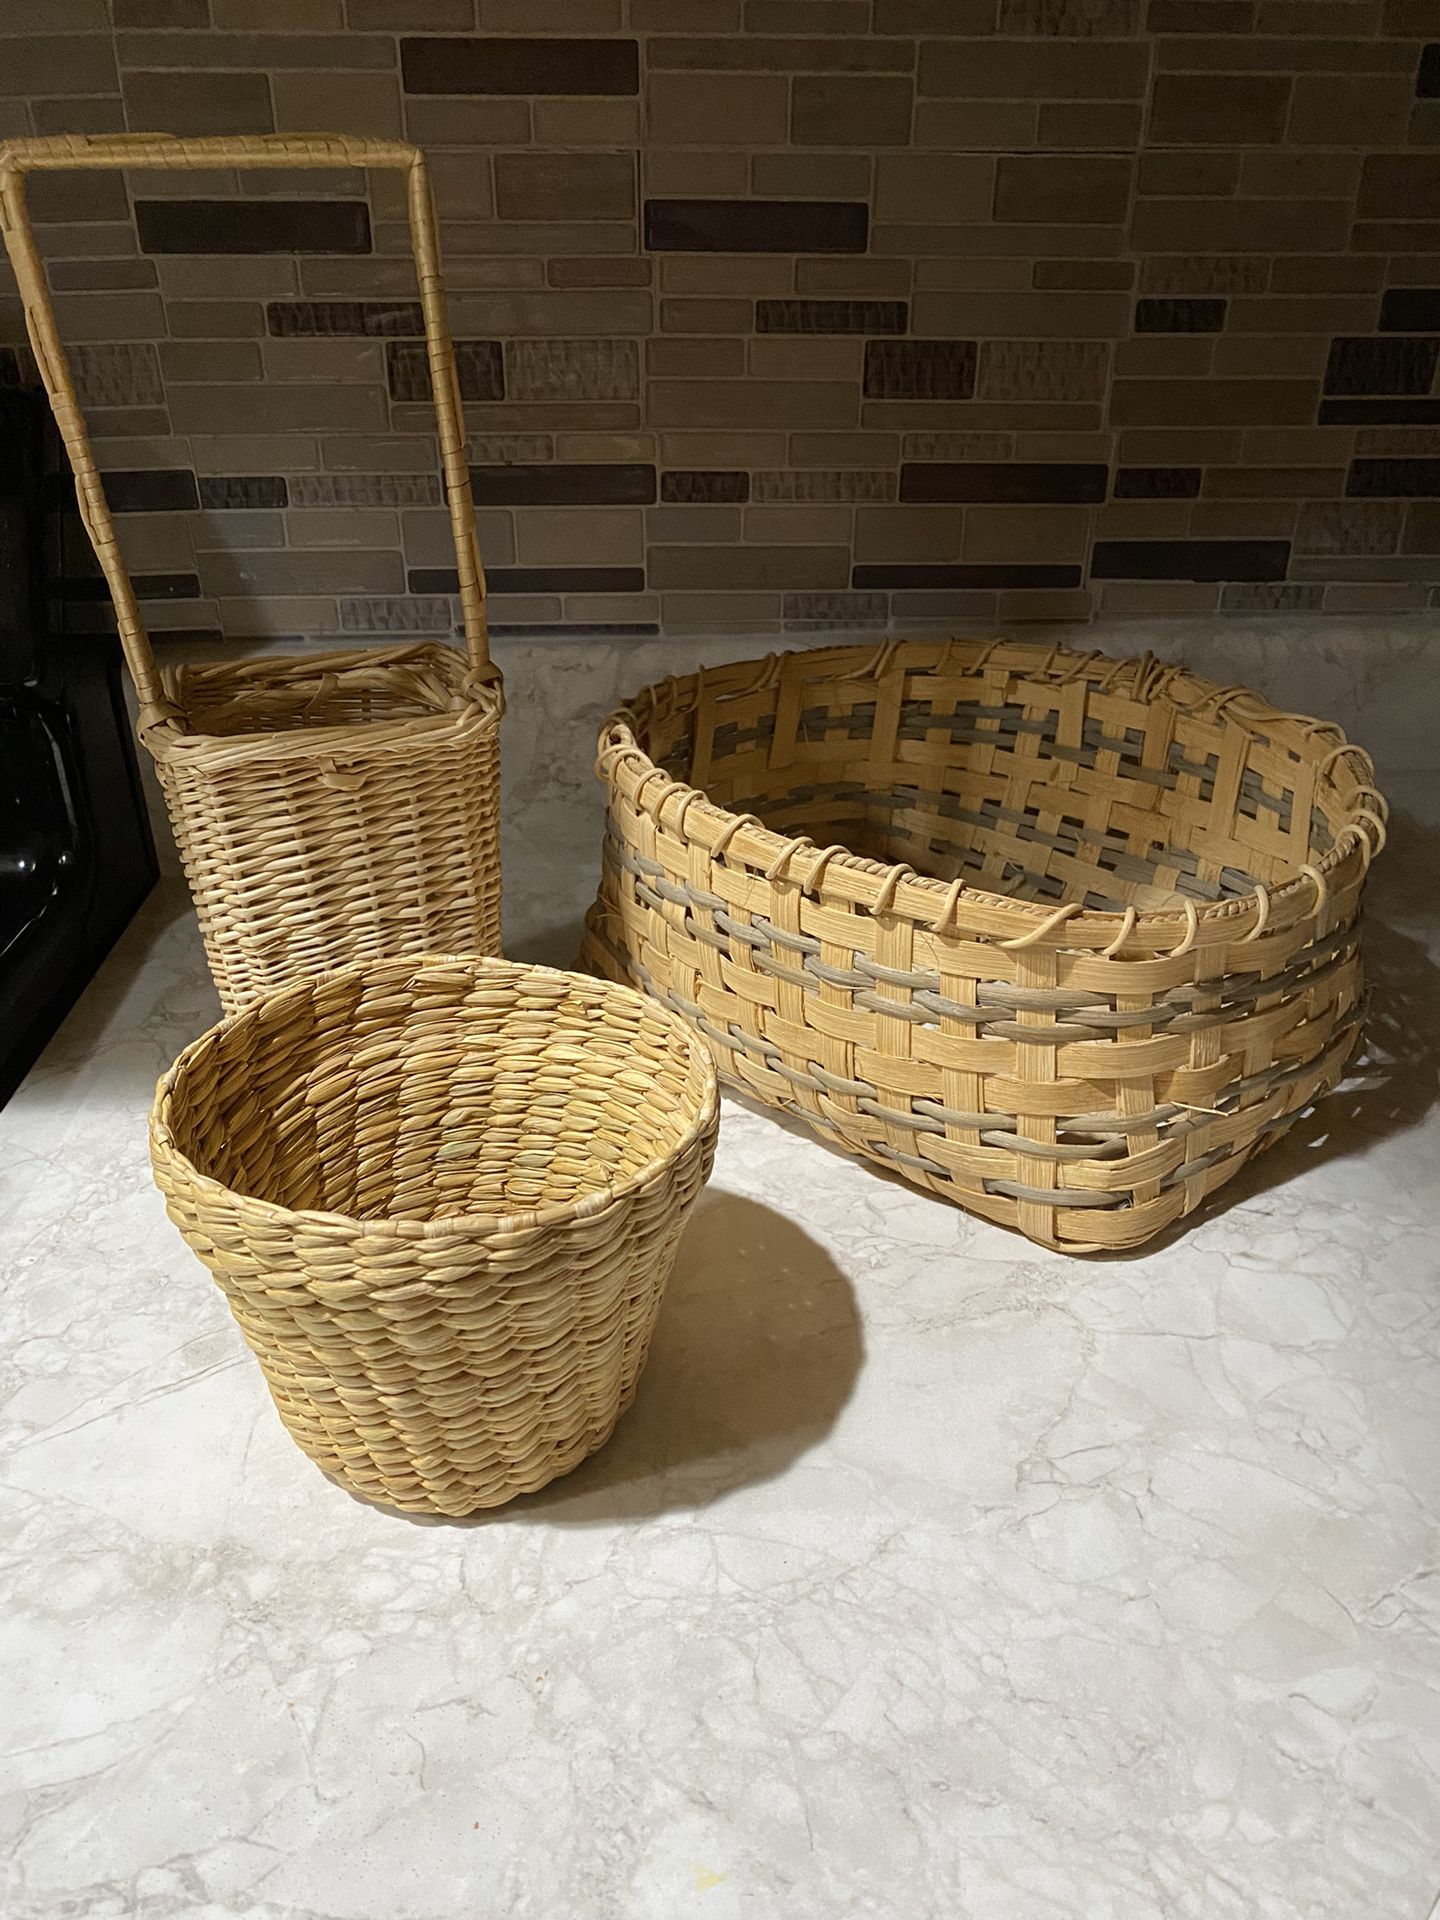 3 Assorted Baskets. Read Description For Details And Location.